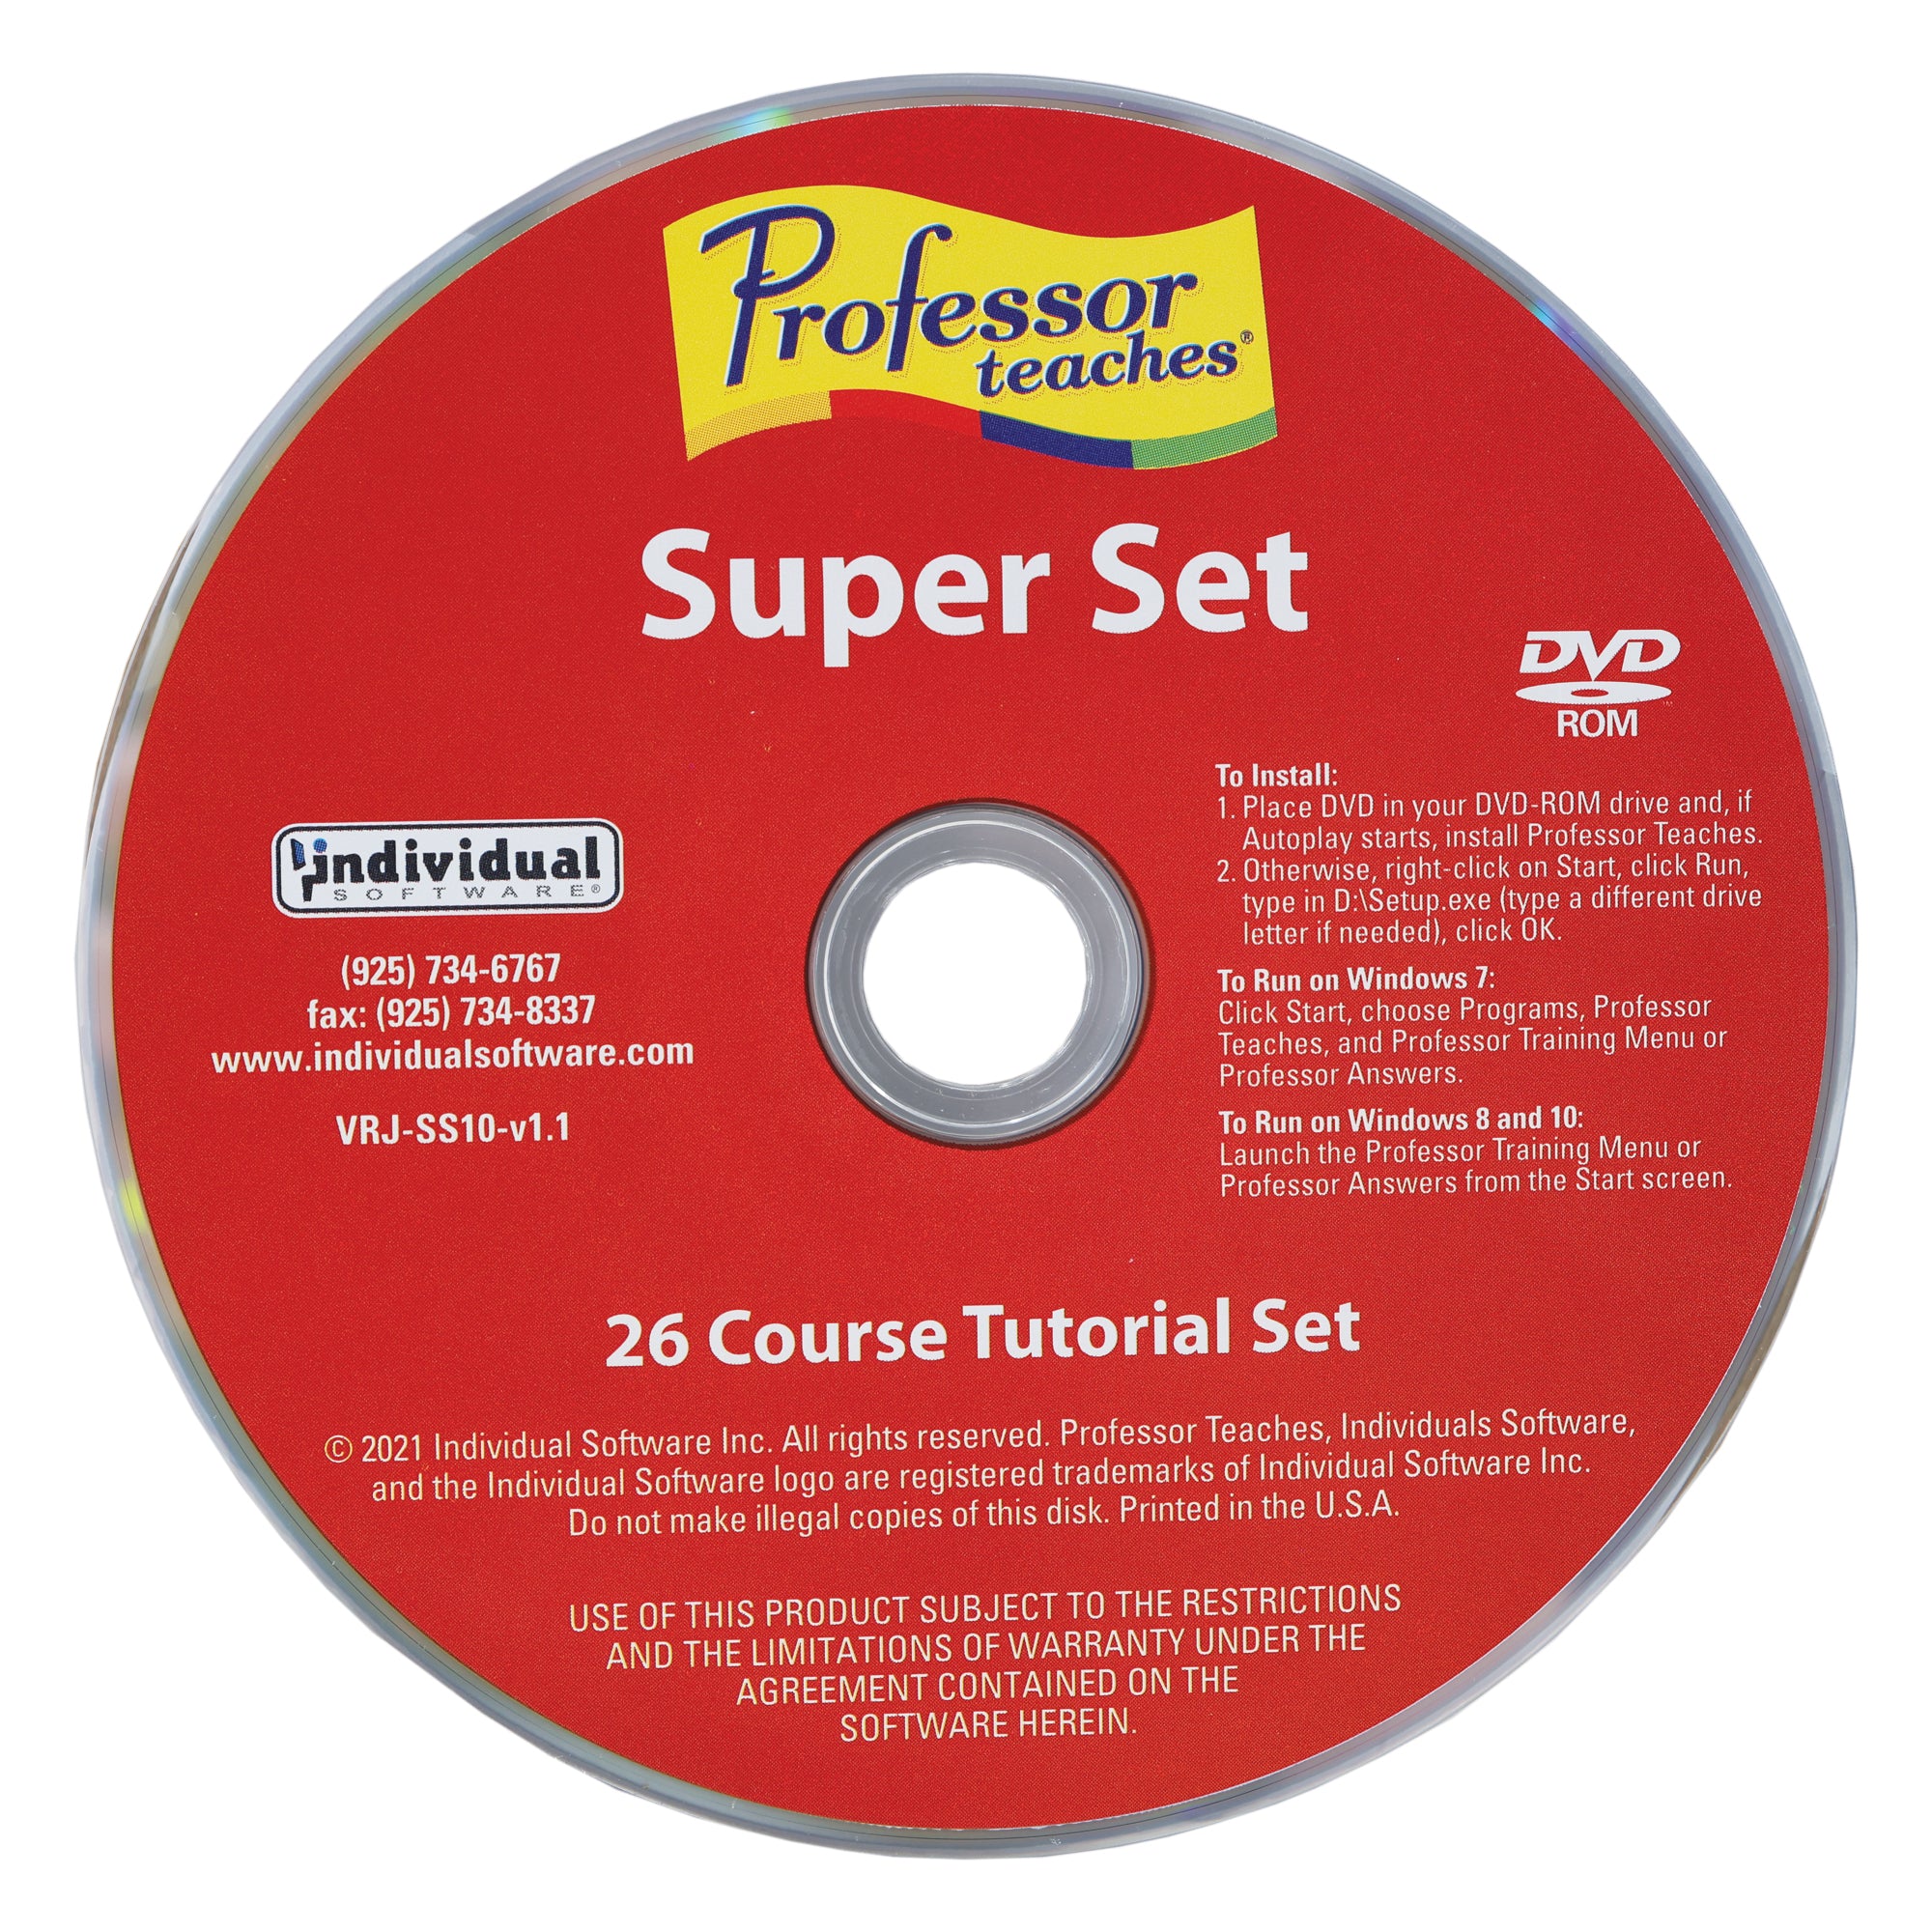 Professor Teaches Super Set DVD-Rom disc, colored red with white text. Main text reads "Professor Teaches Super Set" and "26 course tutorial set."